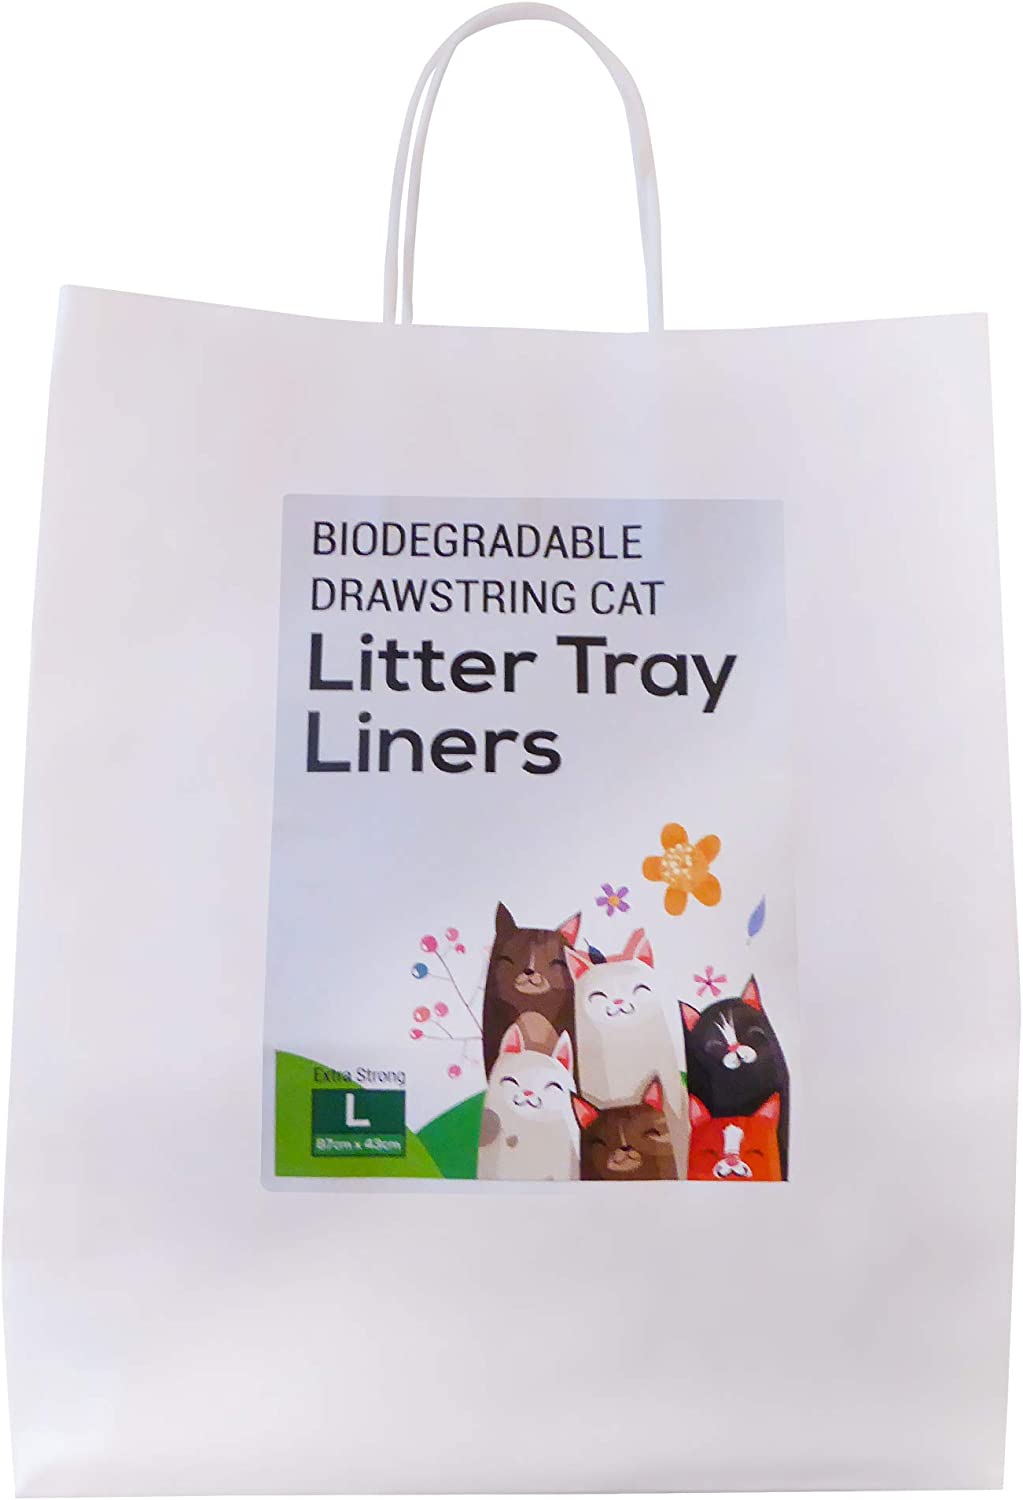 20 Large Biodegradable Cat Litter Tray Liners with Drawstrings